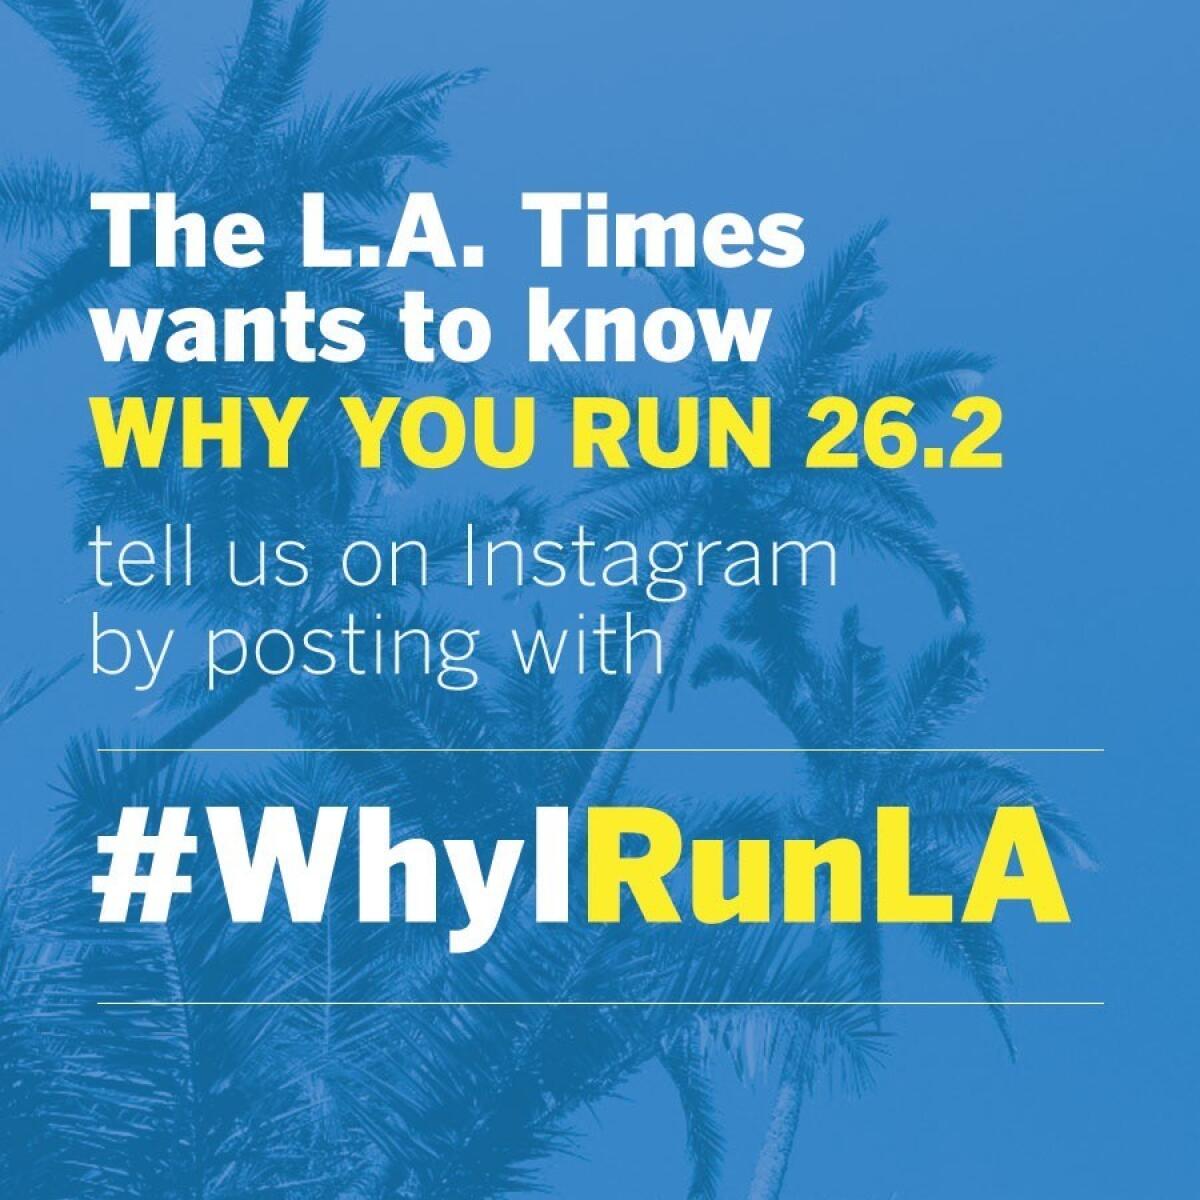 We want to know why you run 26.2. Tell us on Instagram by posting with #WhyIRunLA.